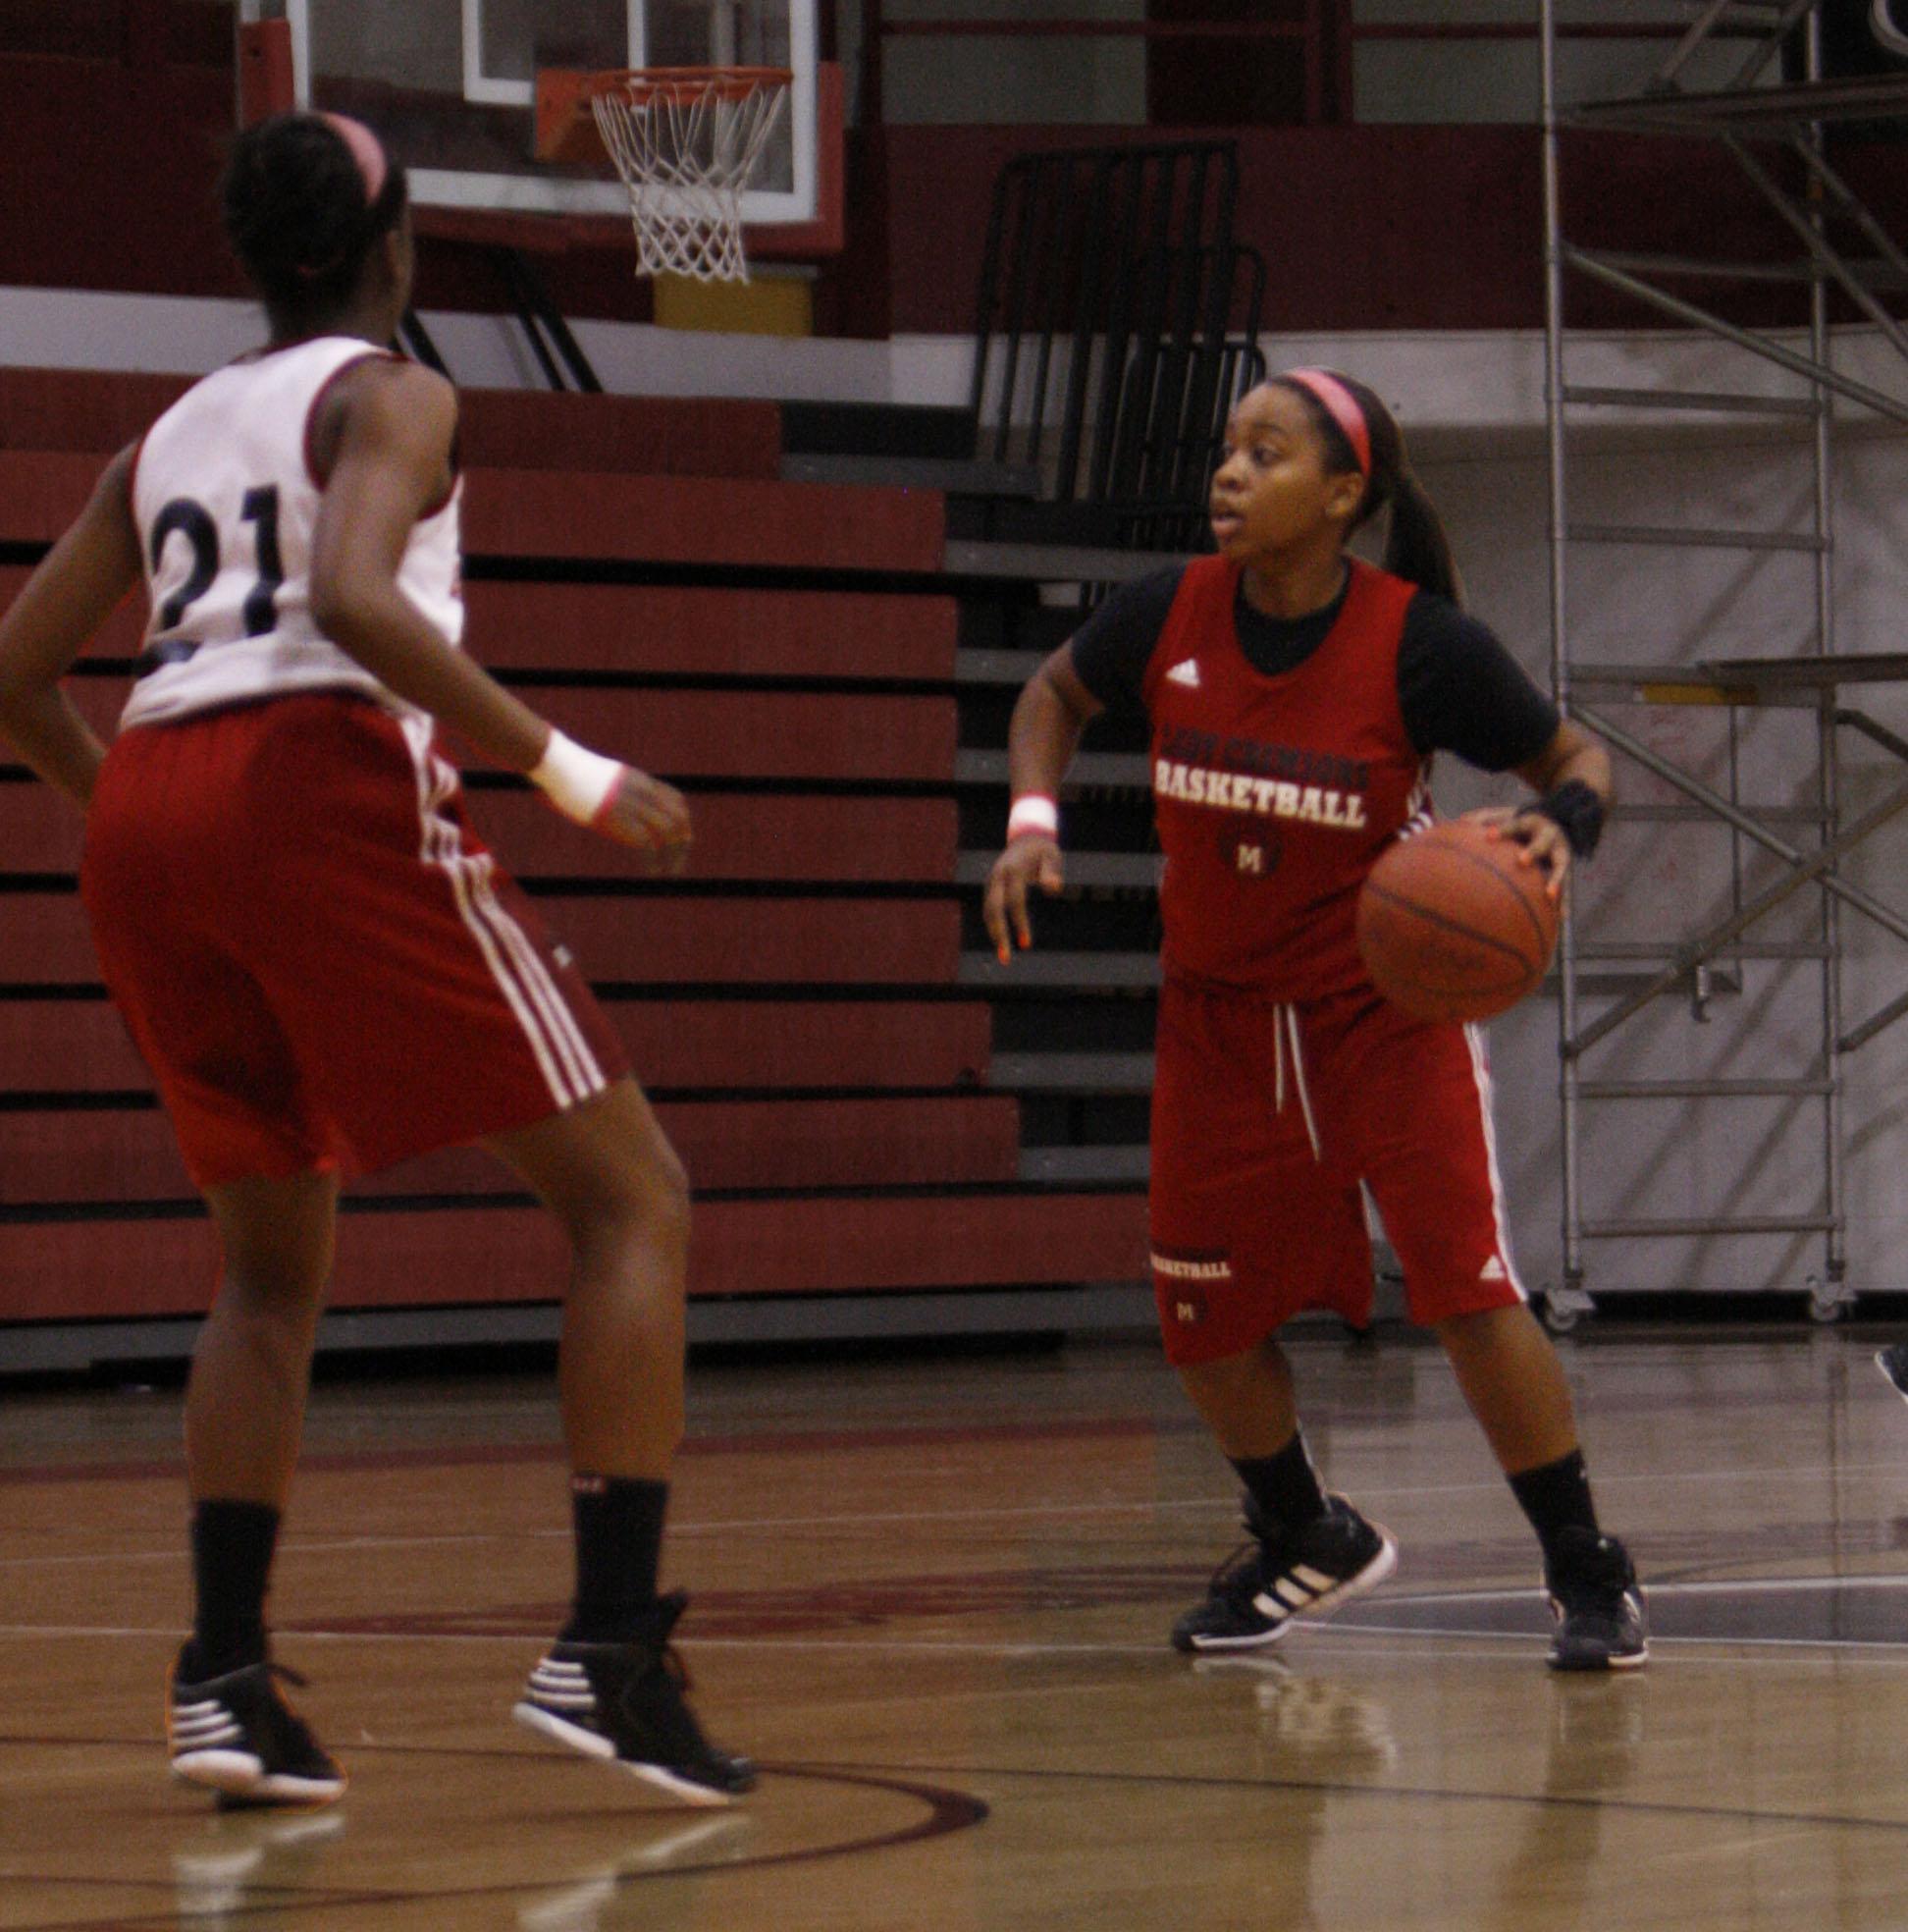 Sophomore, Teanna Curry, dribbles the ball while being guarded by Mackinley Poole.